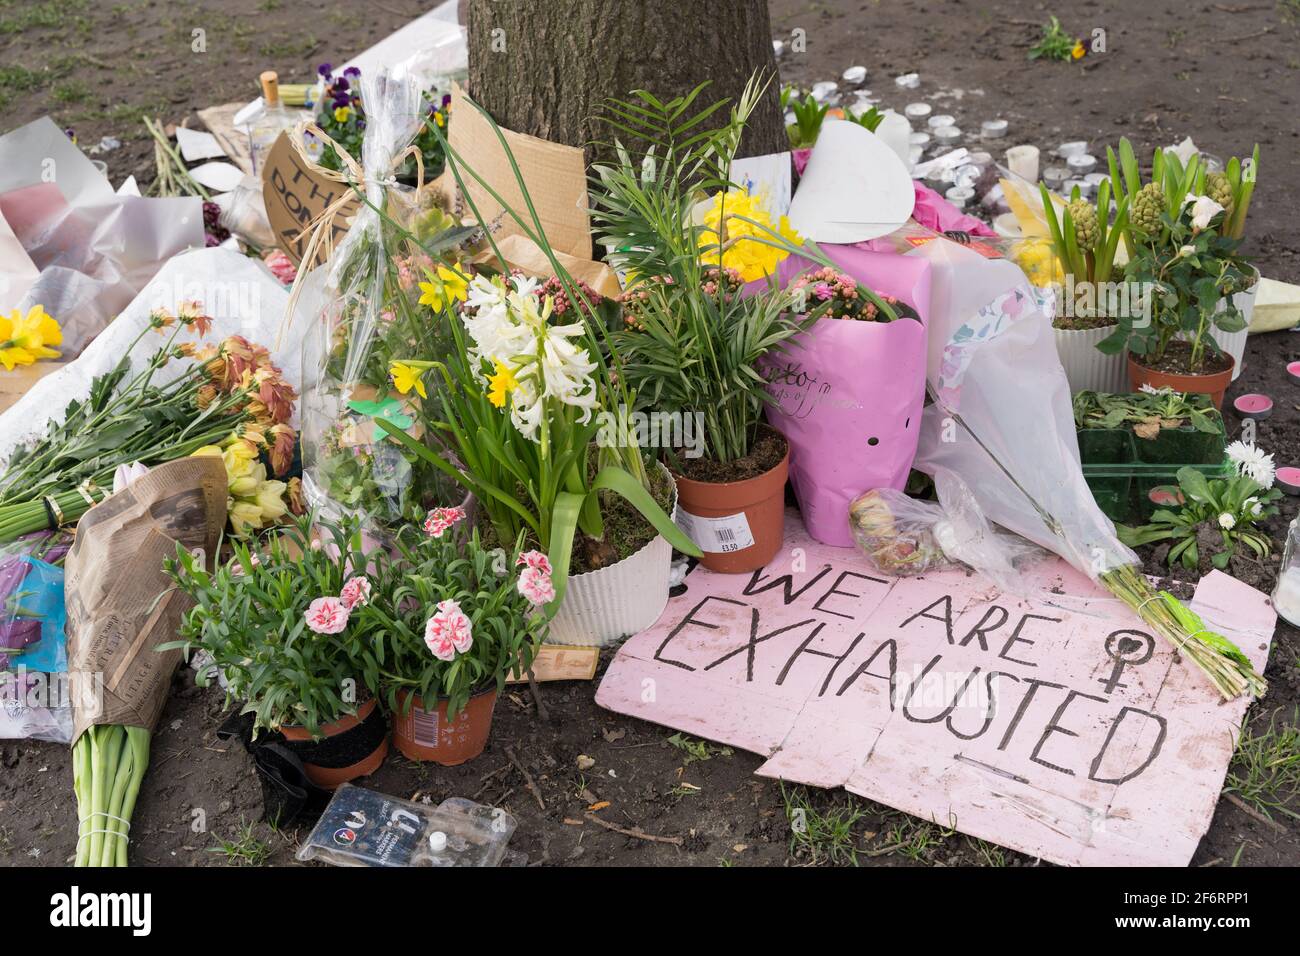 Floral tributes and message left at Clapham command bandstand for Sarah Everard, who was kidnapped and murdered by  suspect Met Police officer Wayne Stock Photo